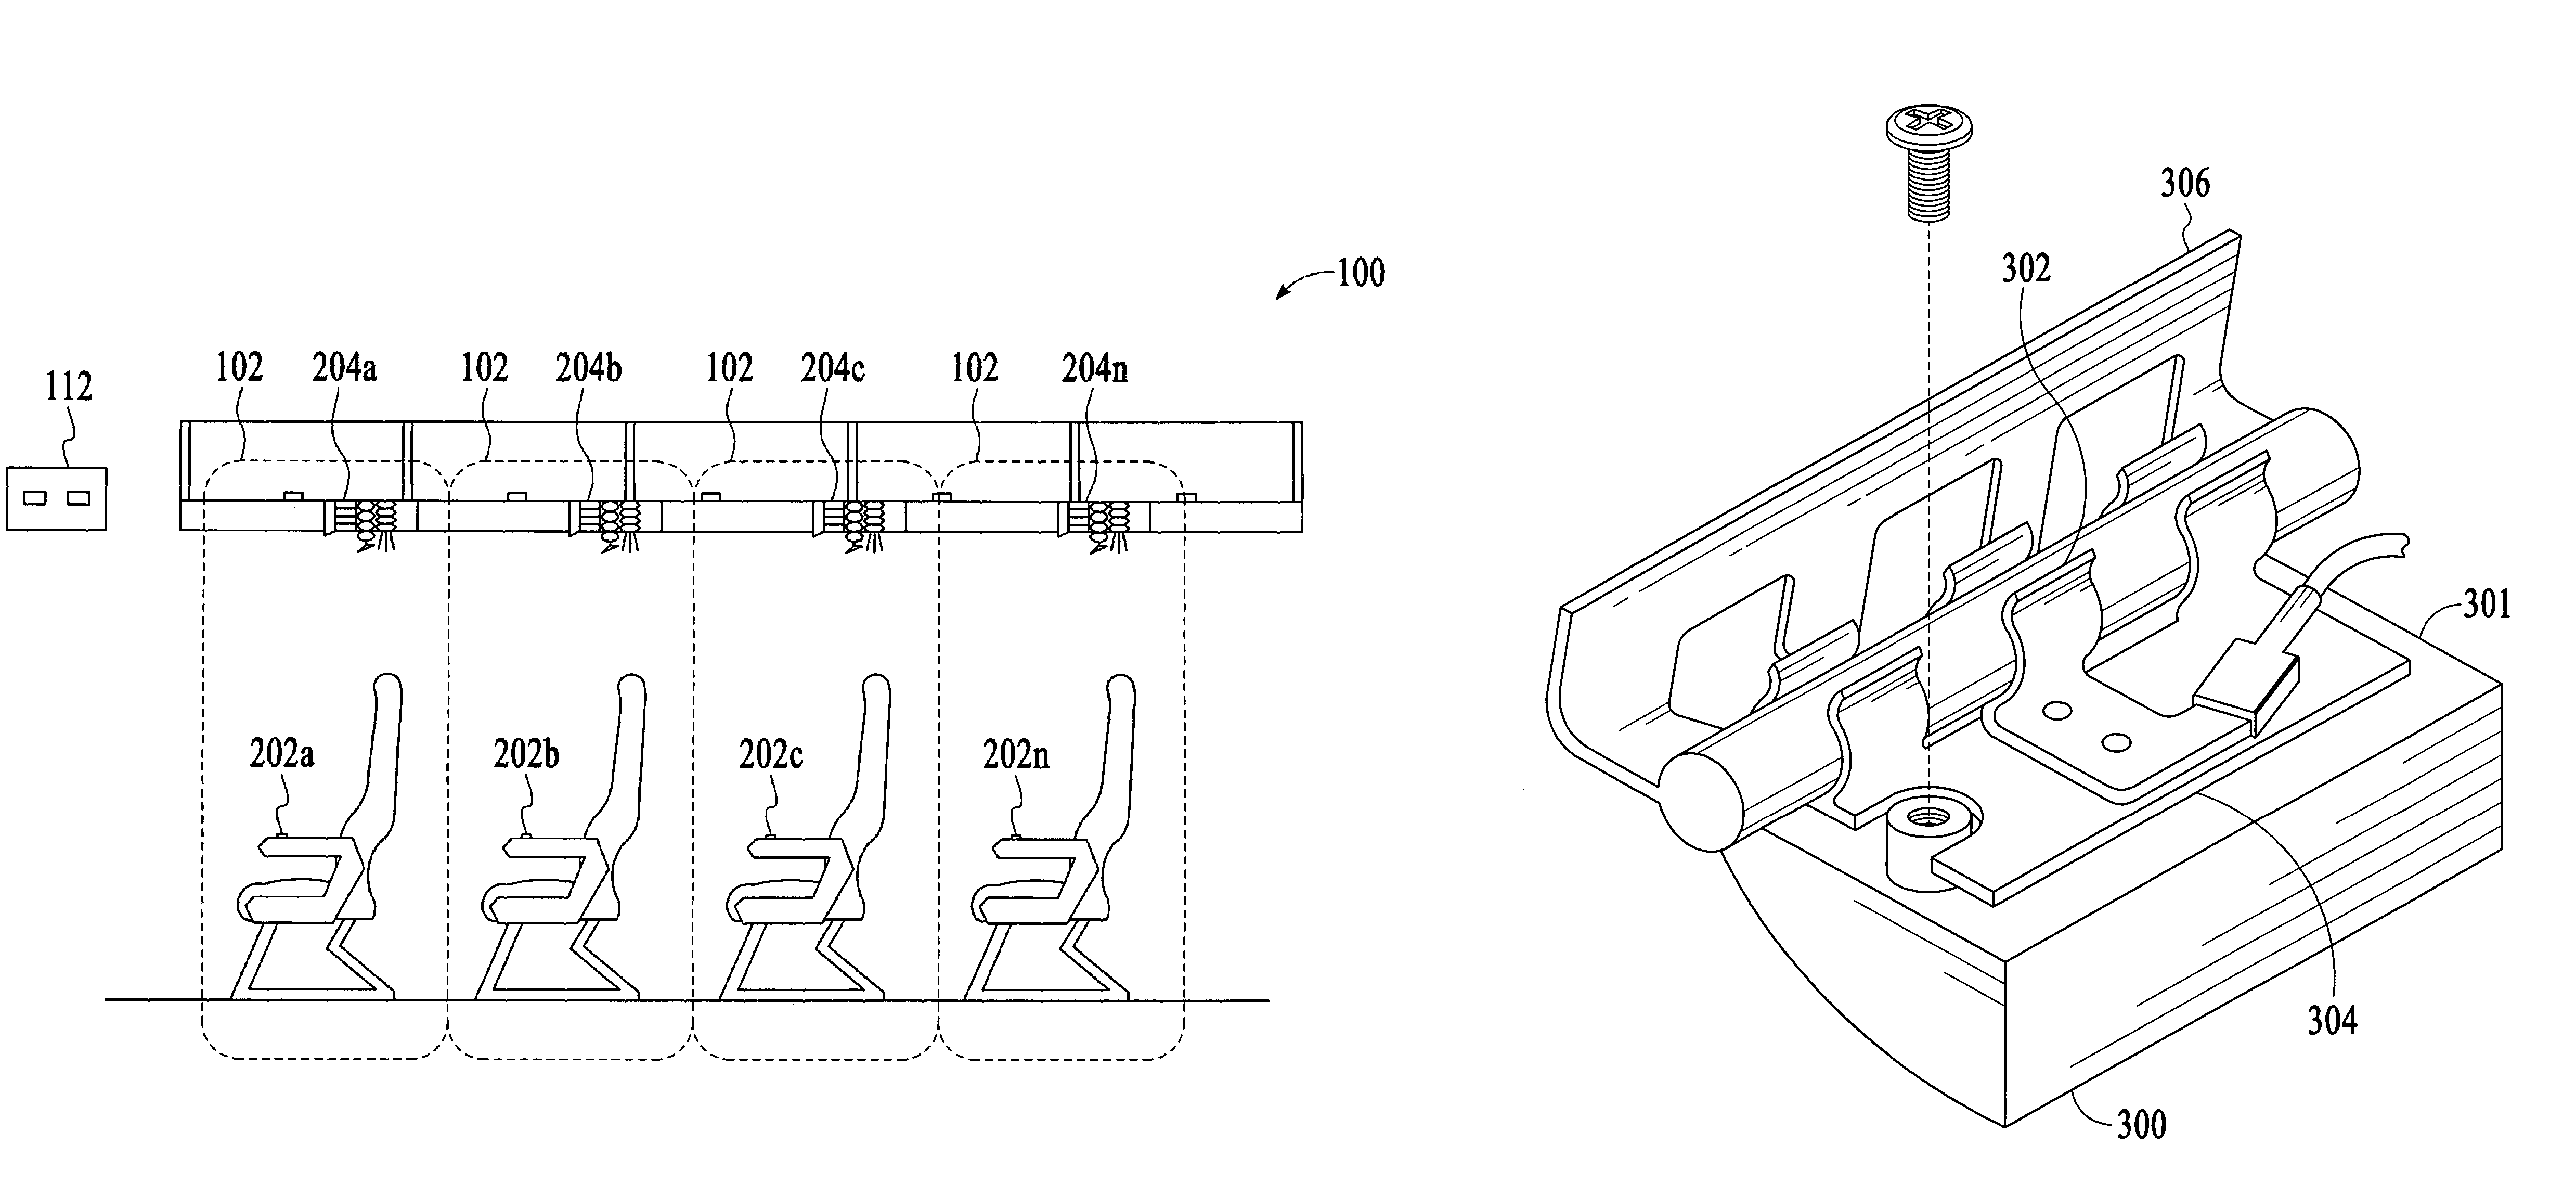 Simplified power system for a cabin services system for an aircraft